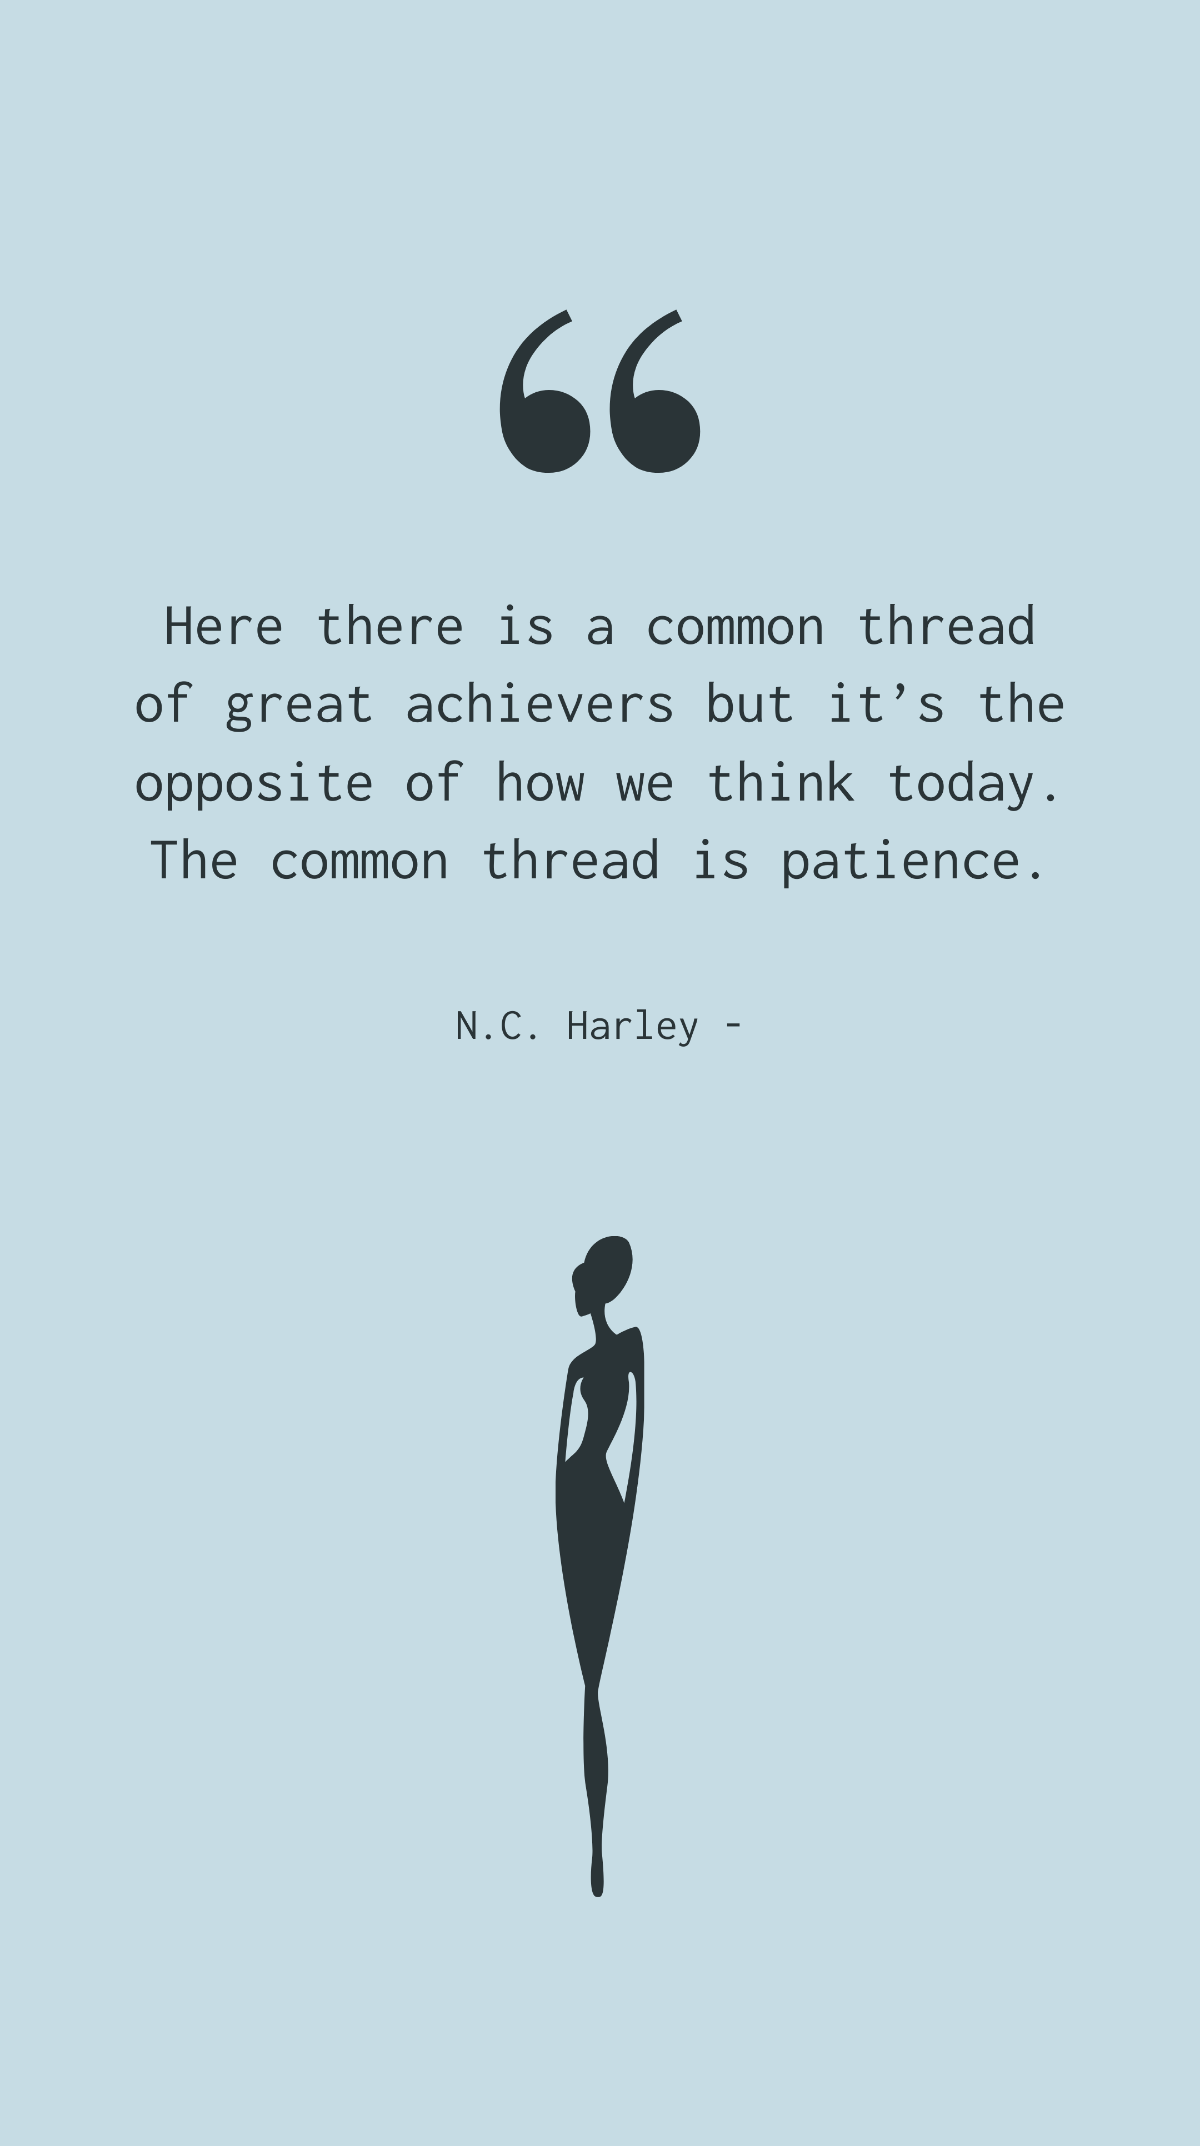 N.C. Harley - Here there is a common thread of great achievers but it’s the opposite of how we think today. The common thread is patience. Template